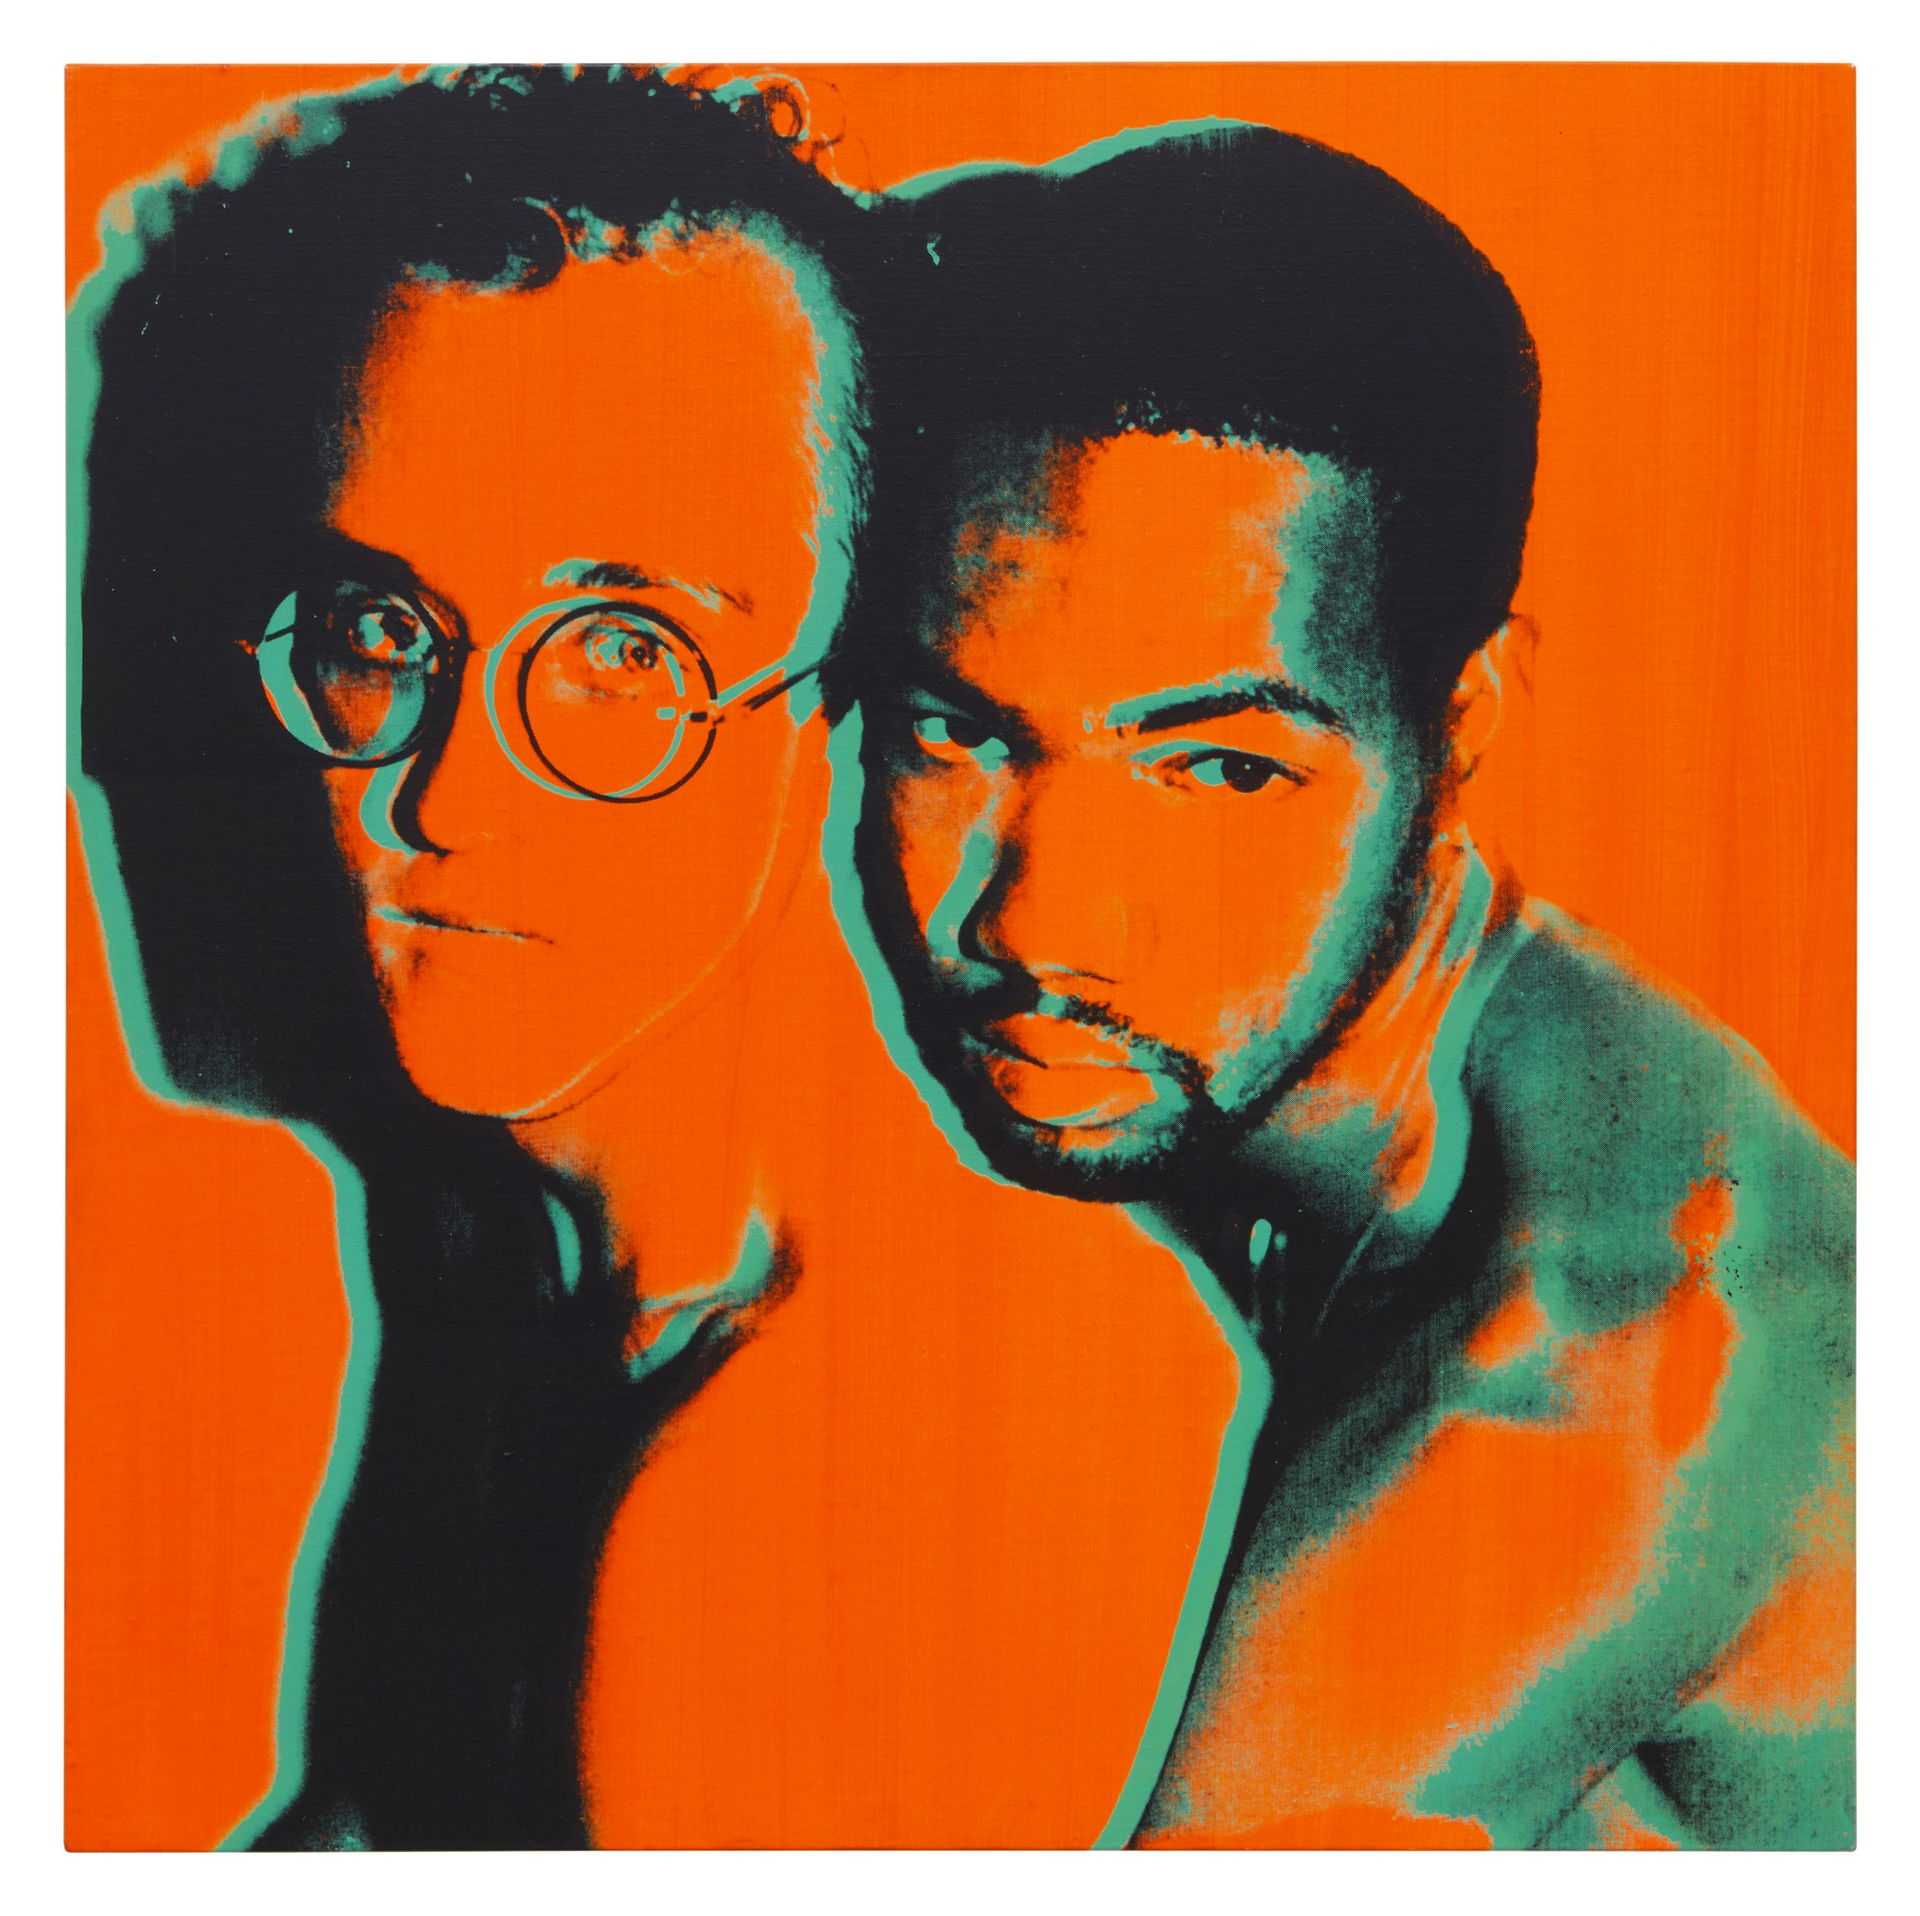 A print by andy Warhol, showing Keith Haring and his boyfriend Juan Dubose hugging. The couple is depicted in bright orange, with black and green shadows.